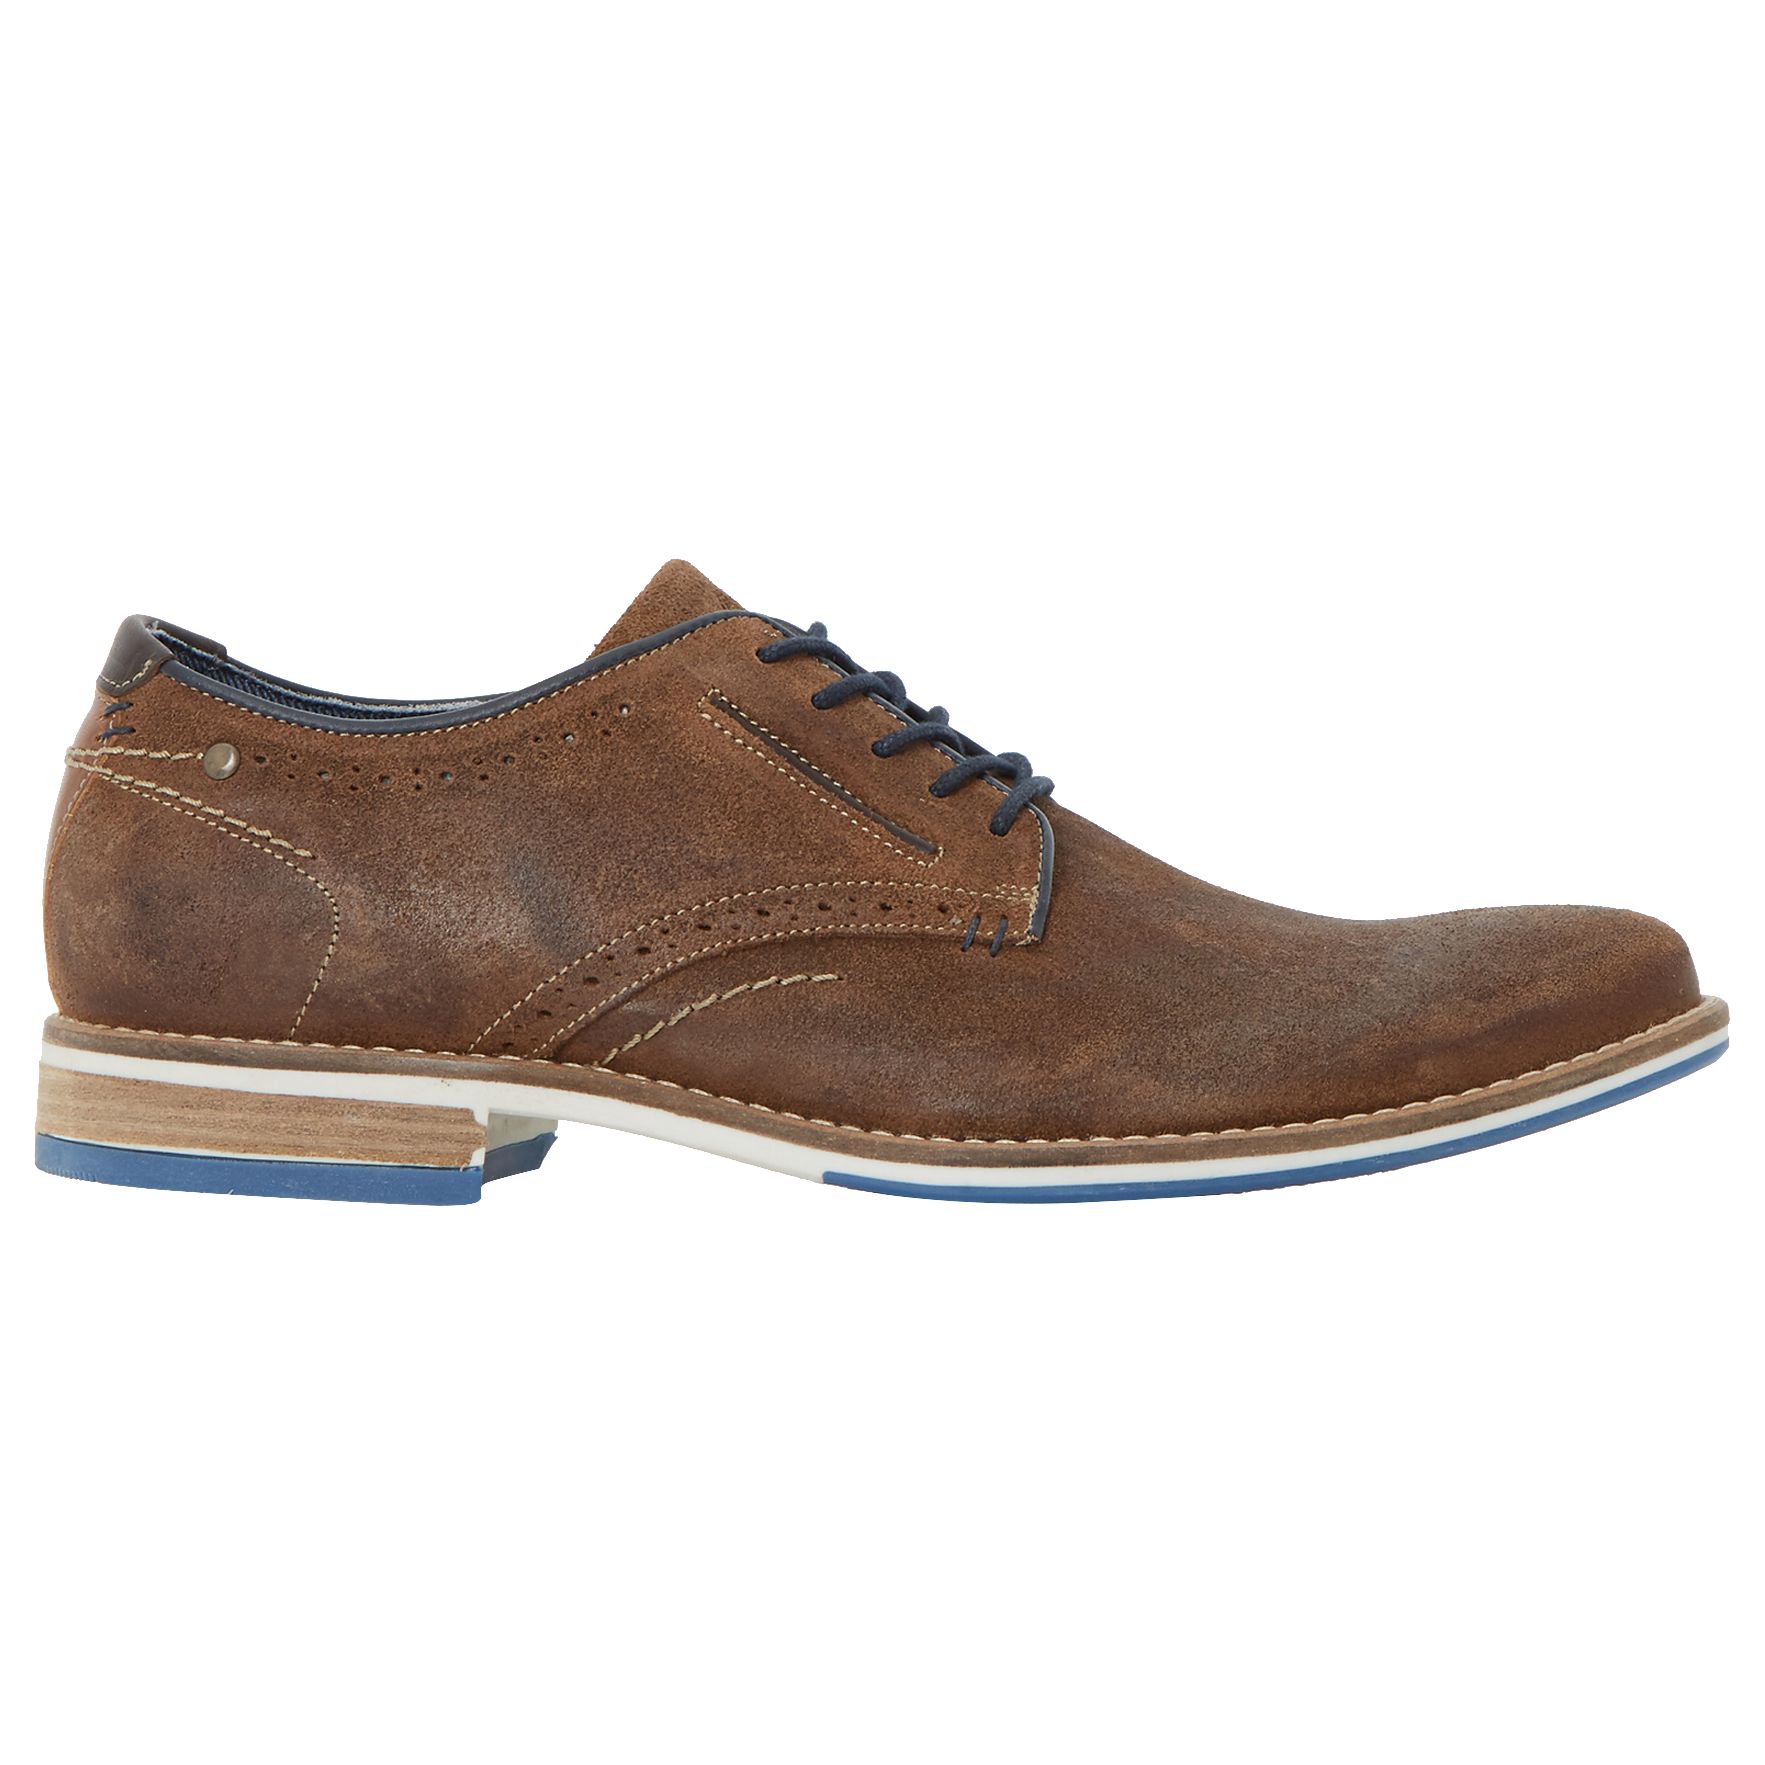 Dune Brewer Gibson Suede Shoes, Tan Suede, 10